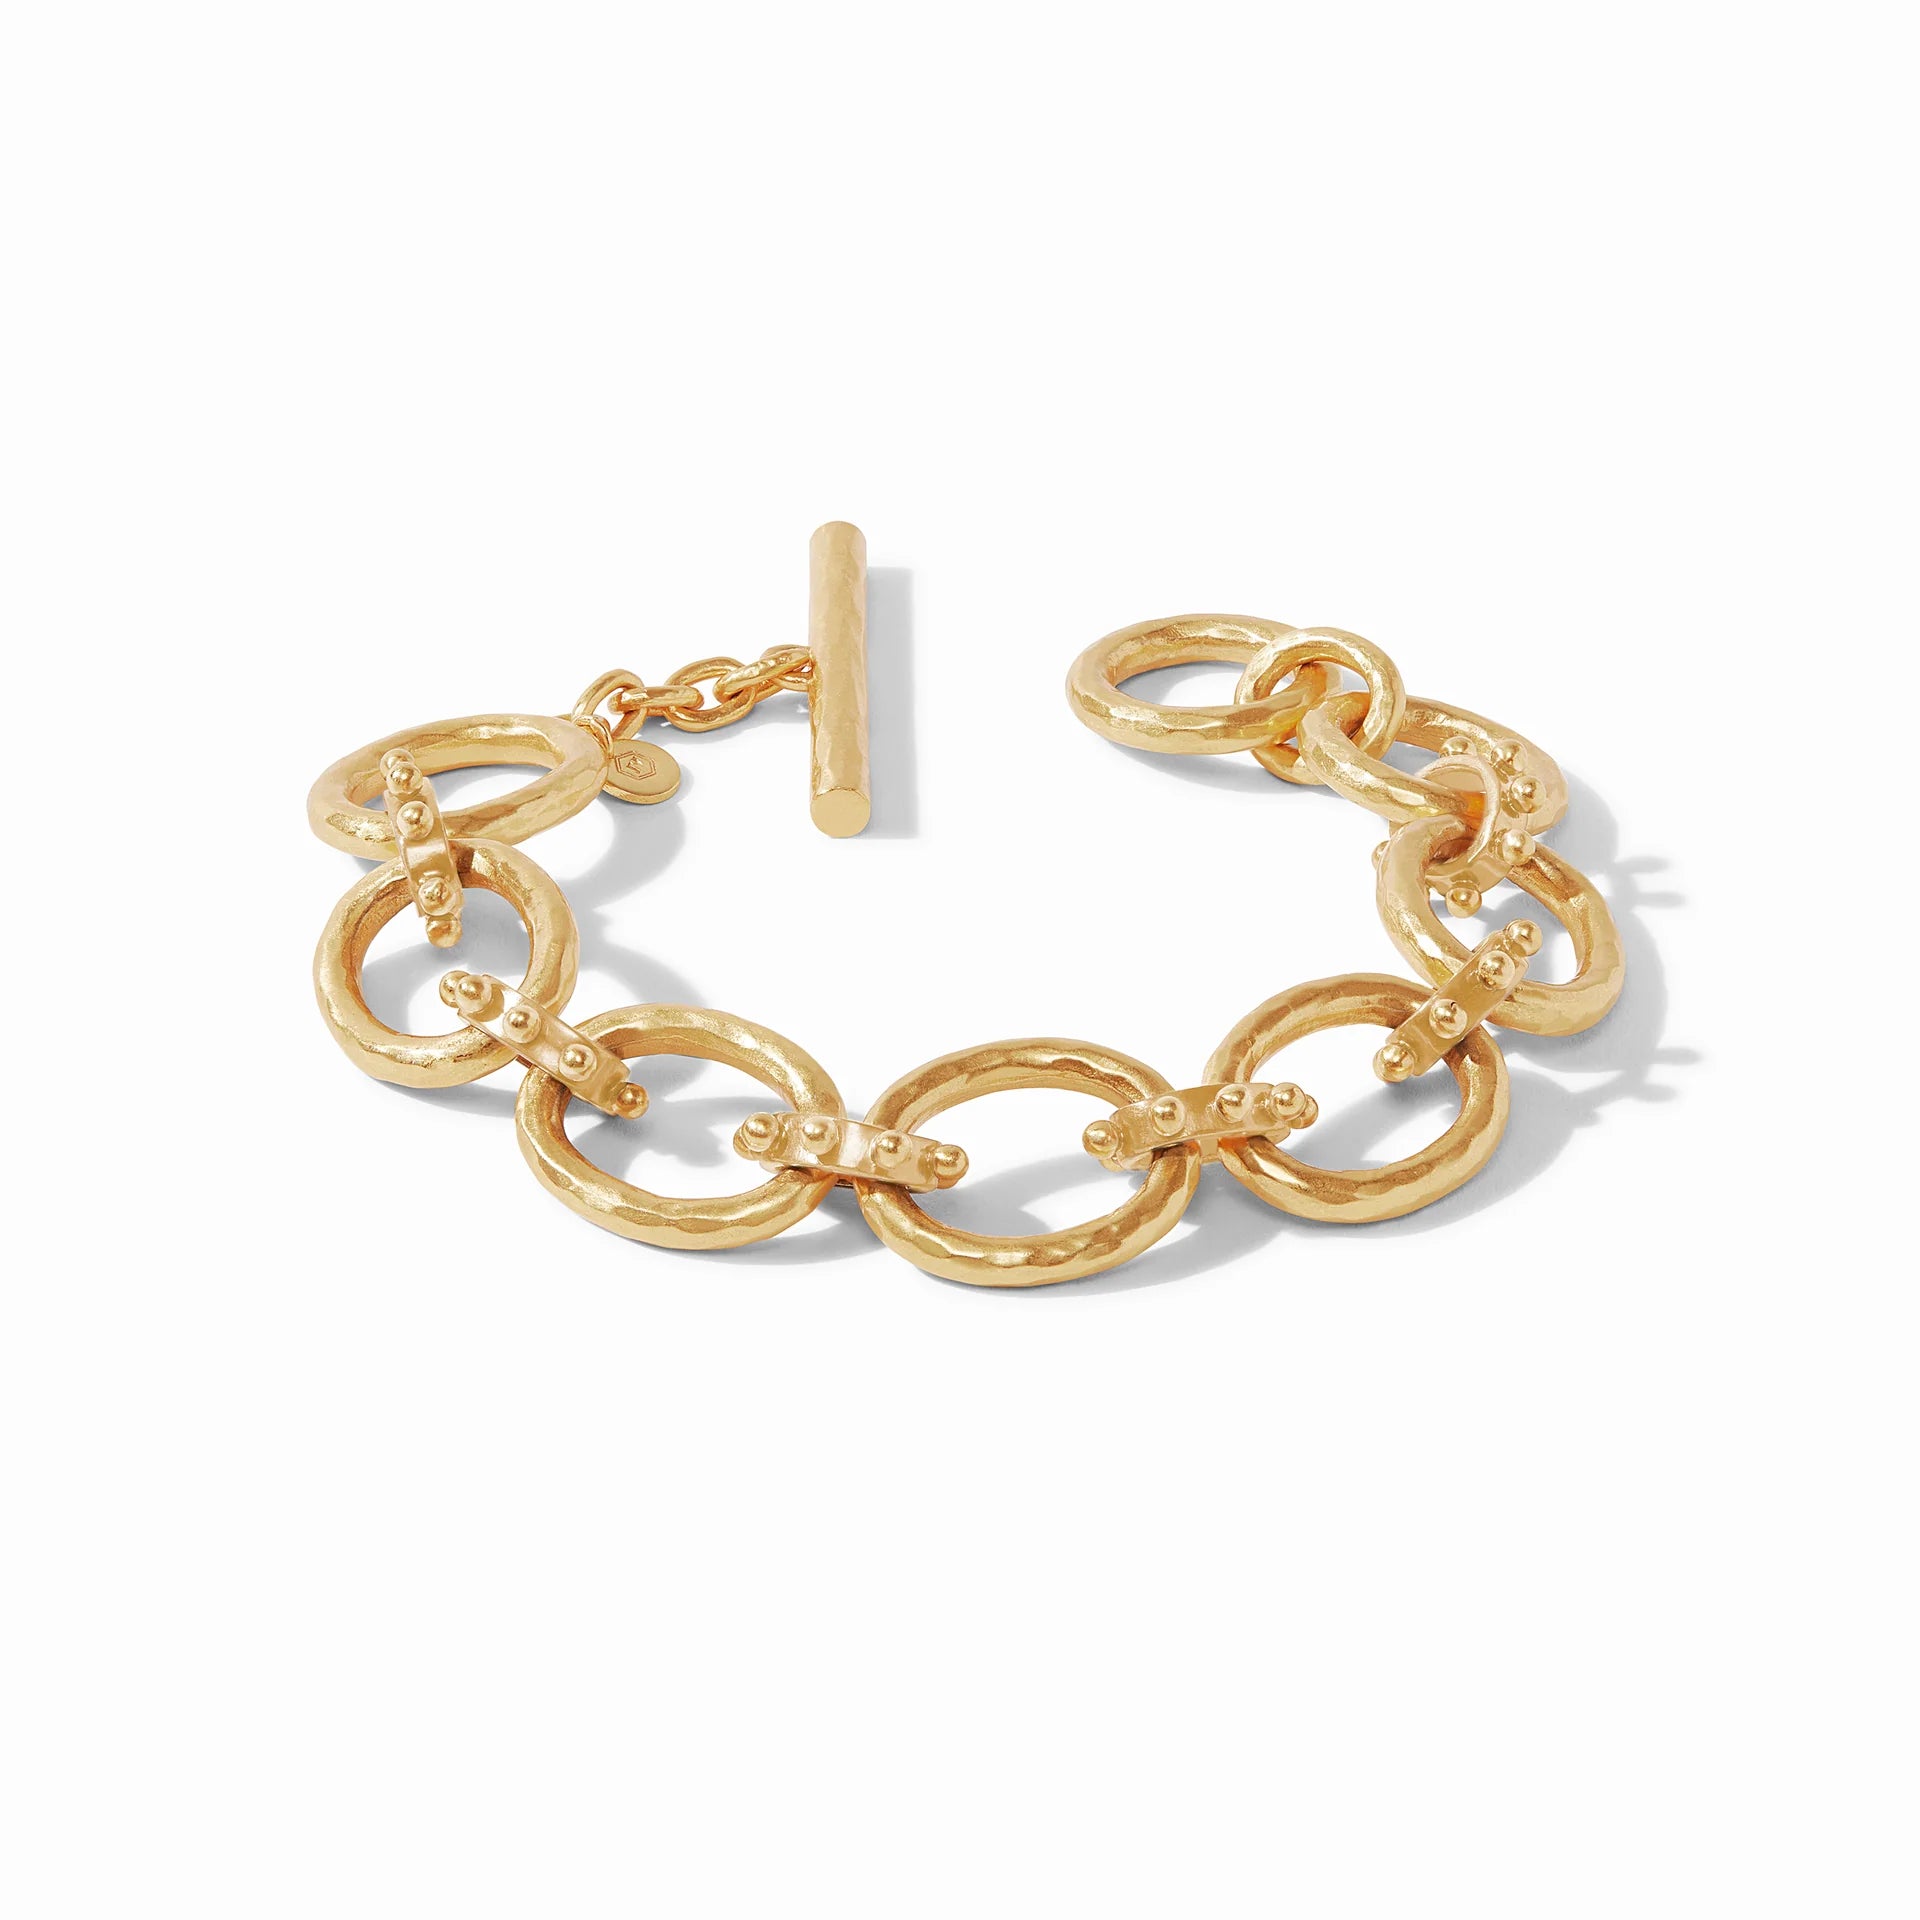 Gold chain link bracelet pictured on a white background. 